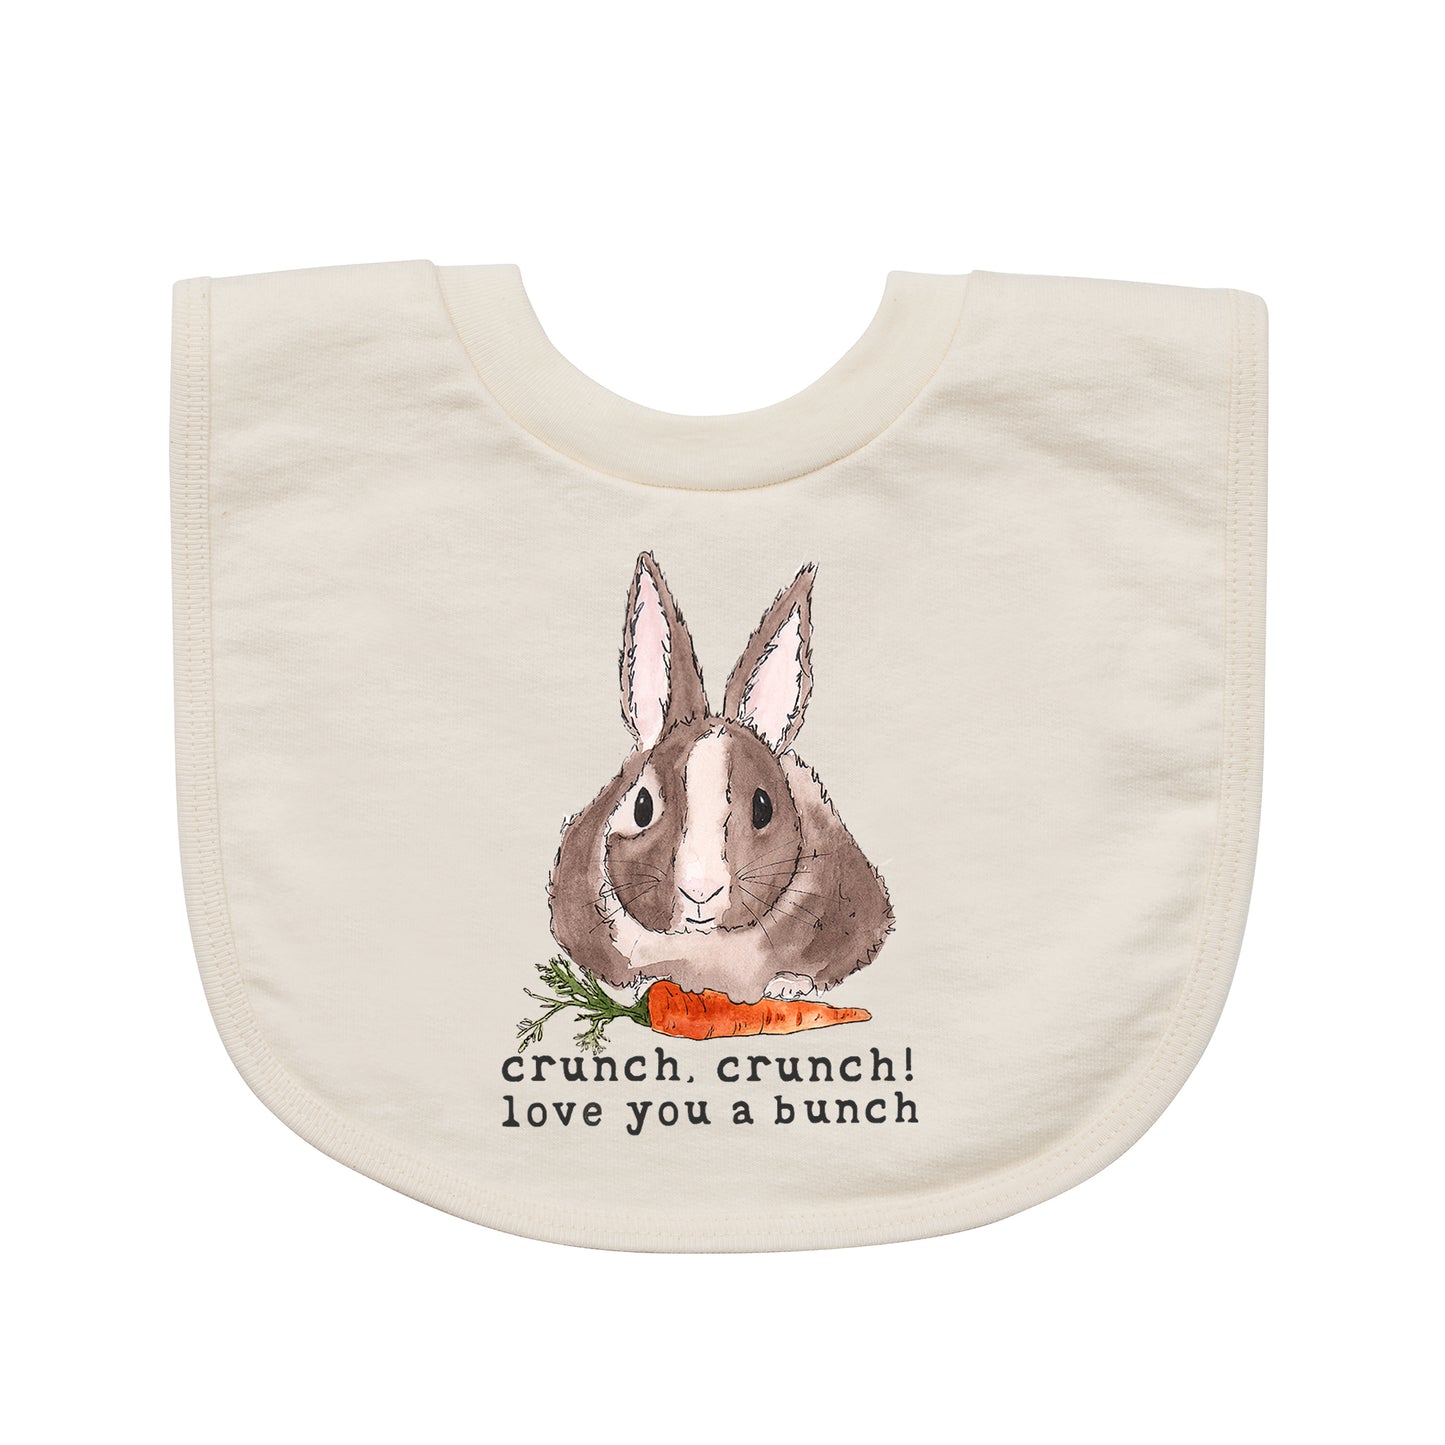 Sustainably made, organic baby and children's apparel that gives back. Organic bunny bib.